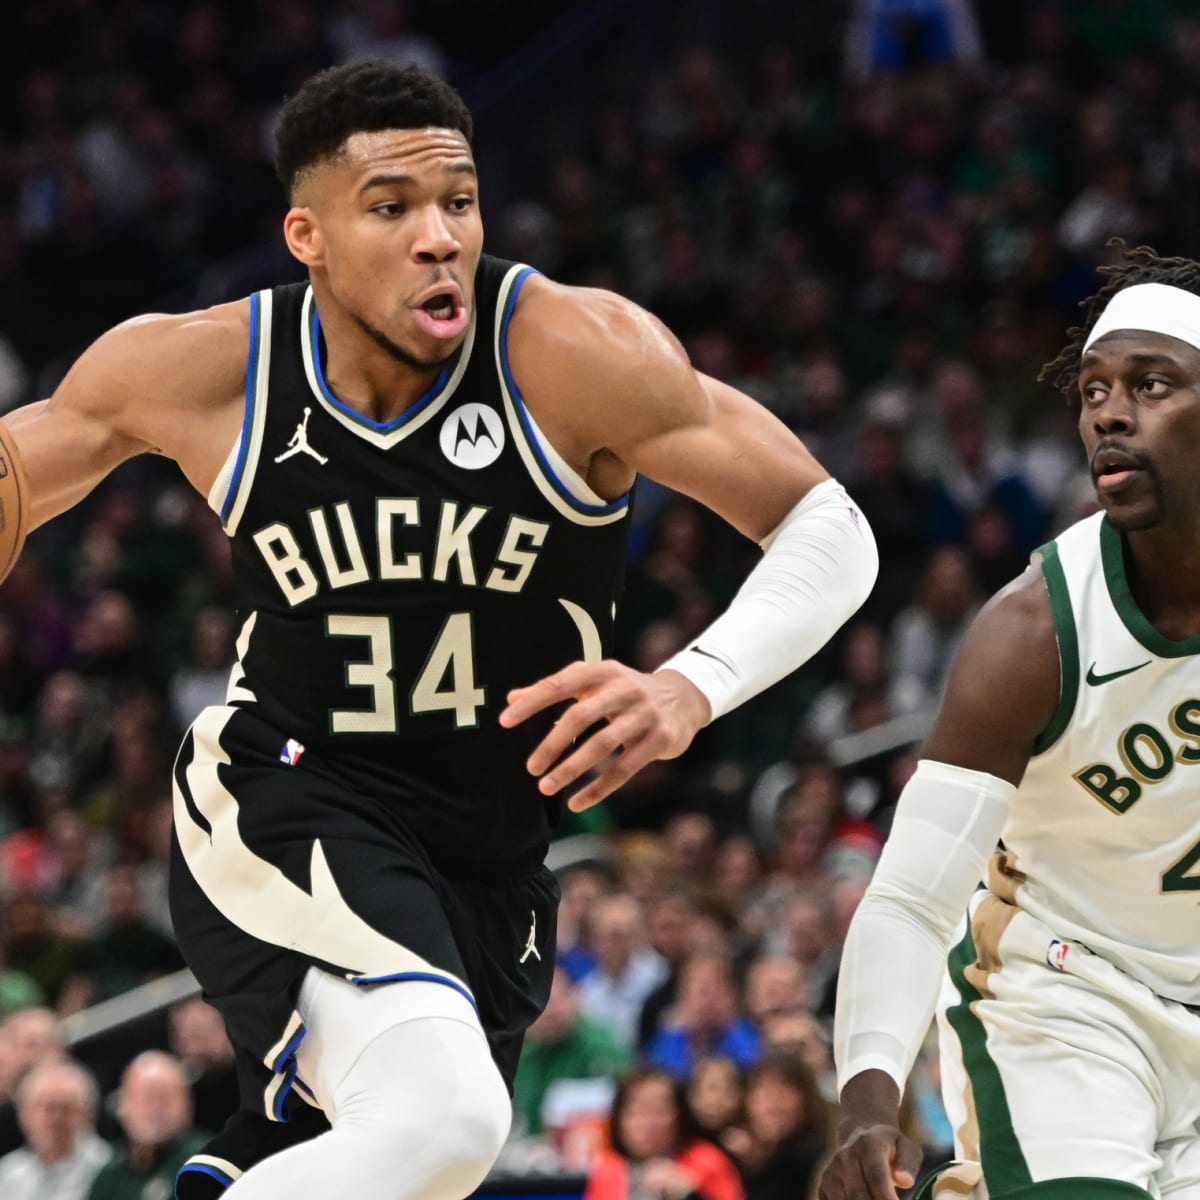 Bucks come from 26 down, get tip-in from Antetokounmpo to take